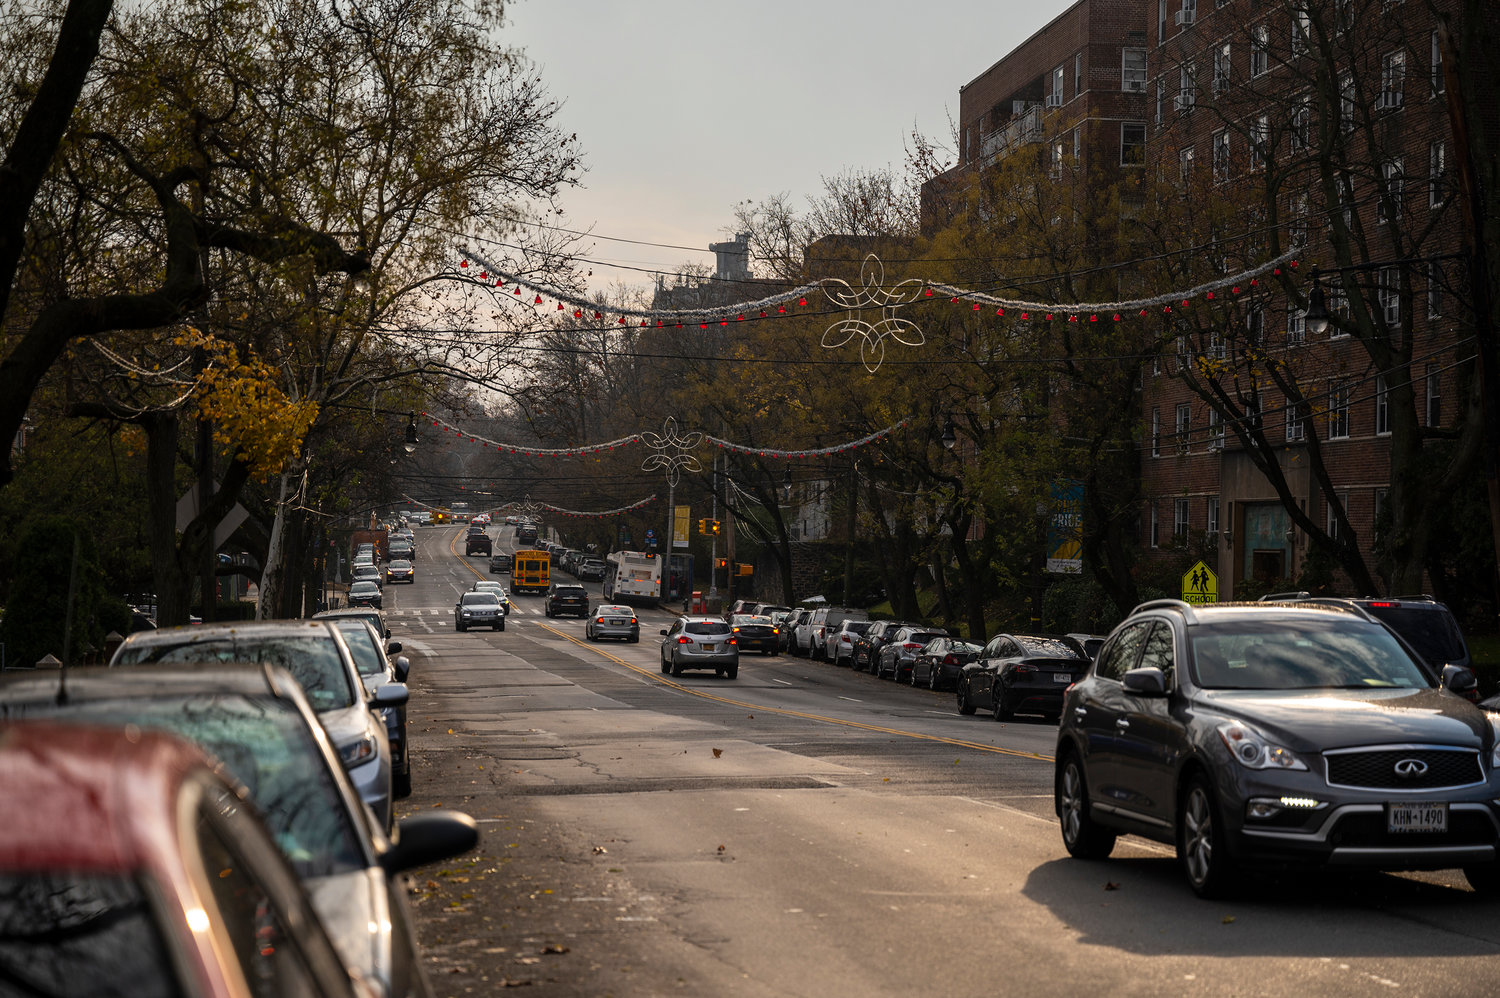 Crossing streets in New York City can be dangerous, even in North Riverdale where there aren’t as many cars as, say Midtown. Creating more pedestrian-friendly streets and a less car-centric society is what many transit advocates are praying for.